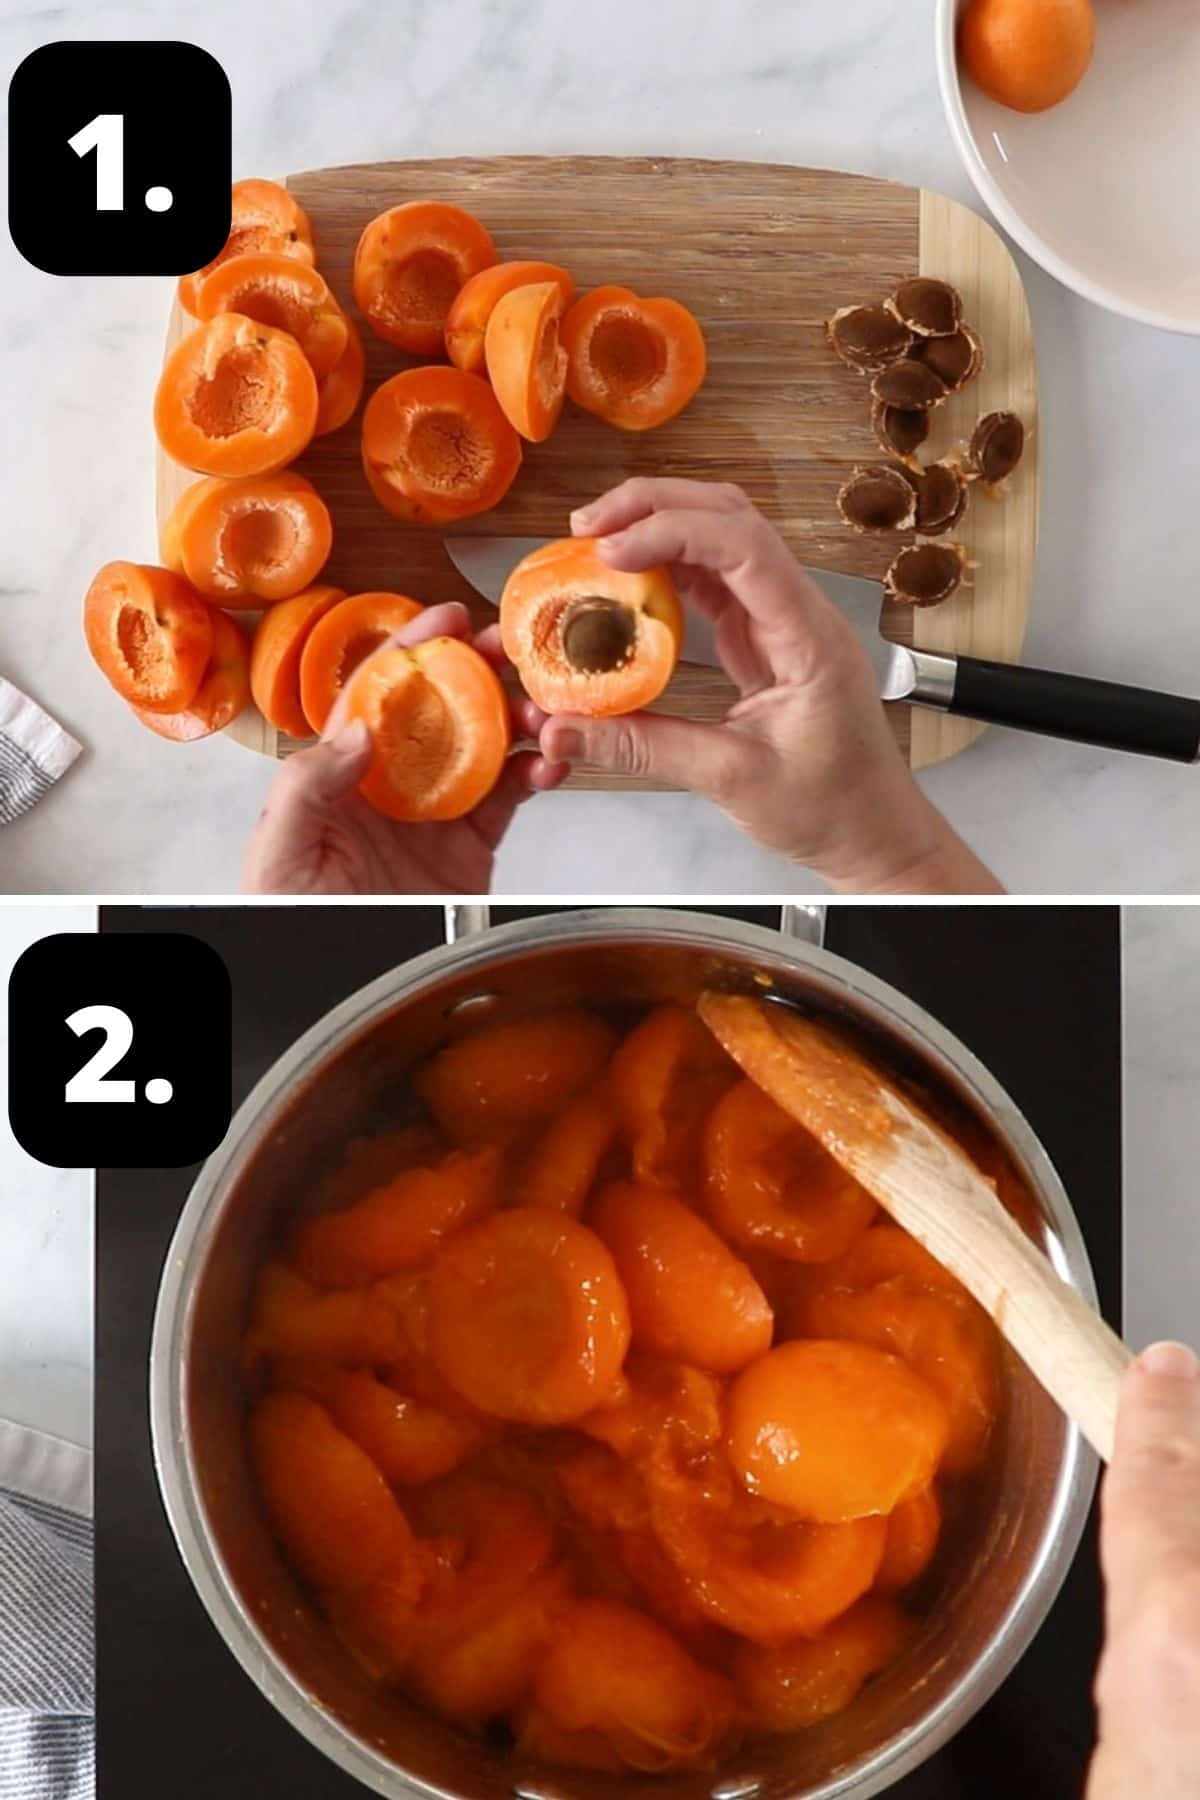 Steps 1-2 of preparing this recipe - slicing the apricots and starting the cooking process in a large saucepan.